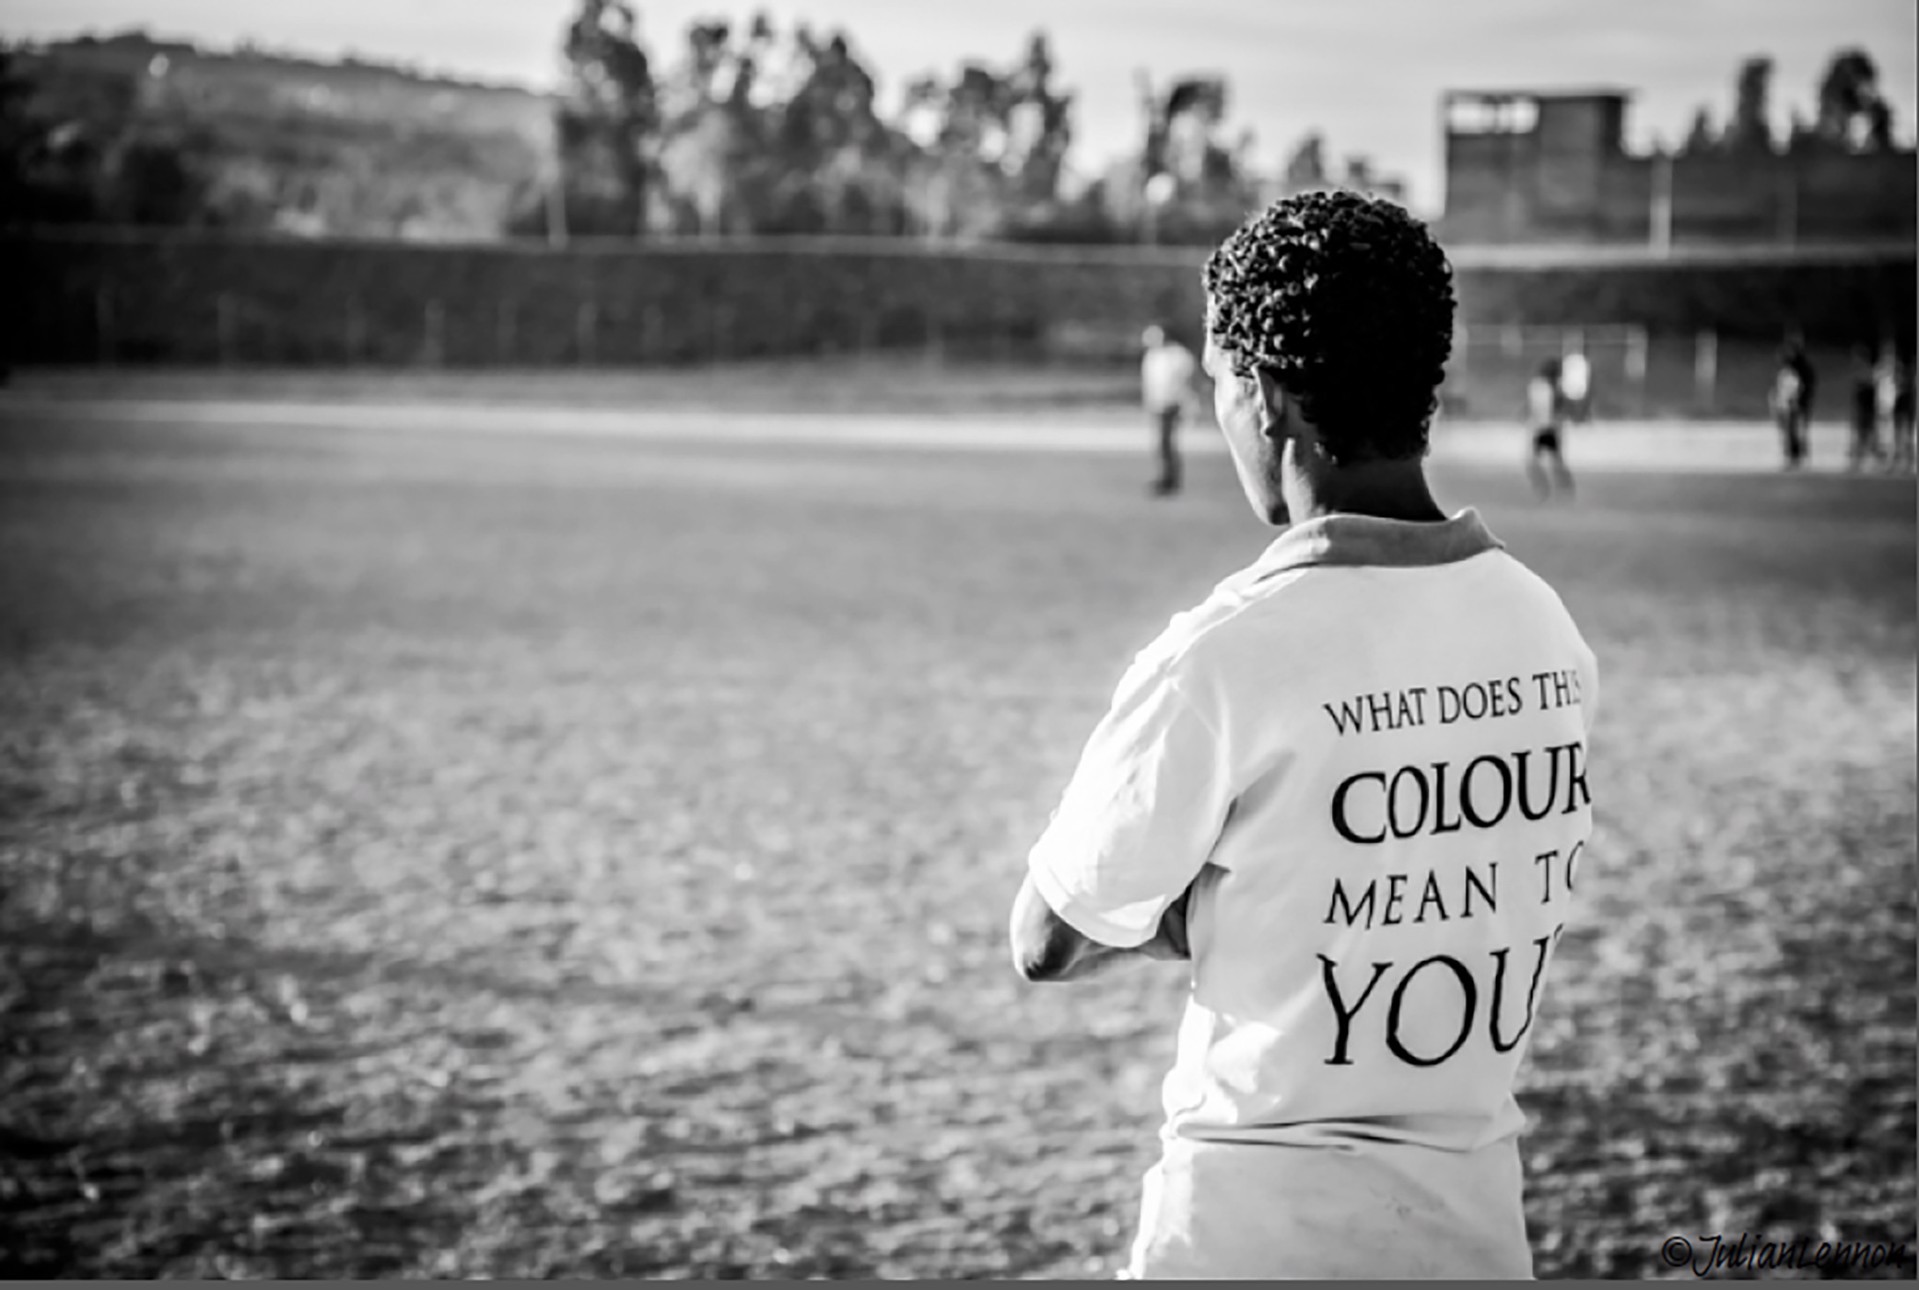 What Does Colour Mean to You by Julian Lennon